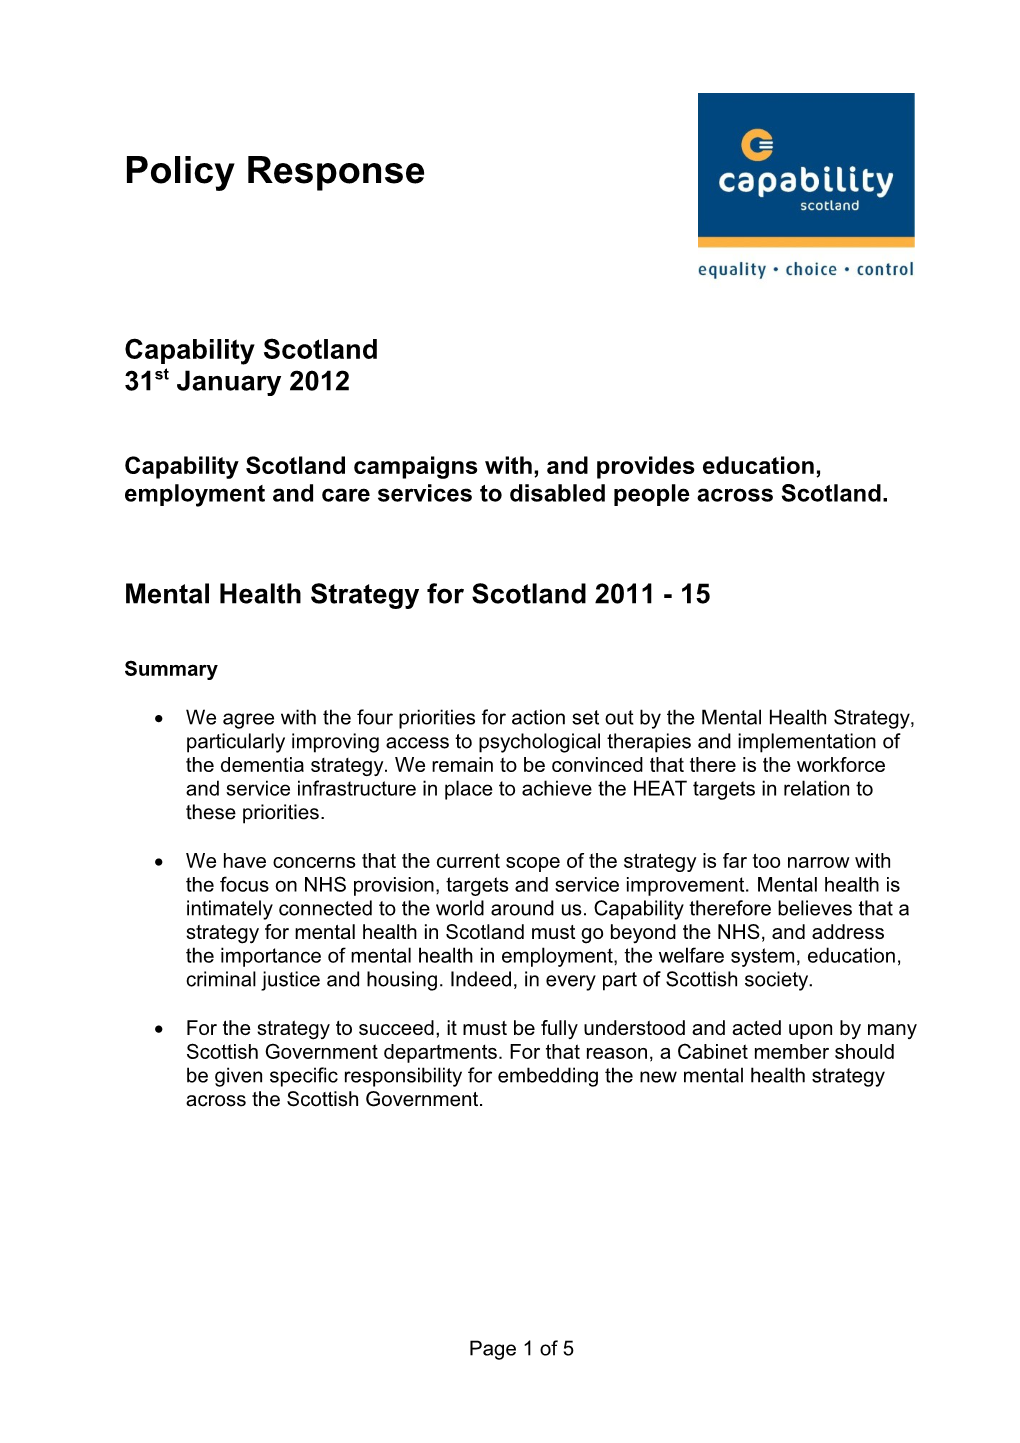 Mental Health Strategy for Scotland 2011 - 15